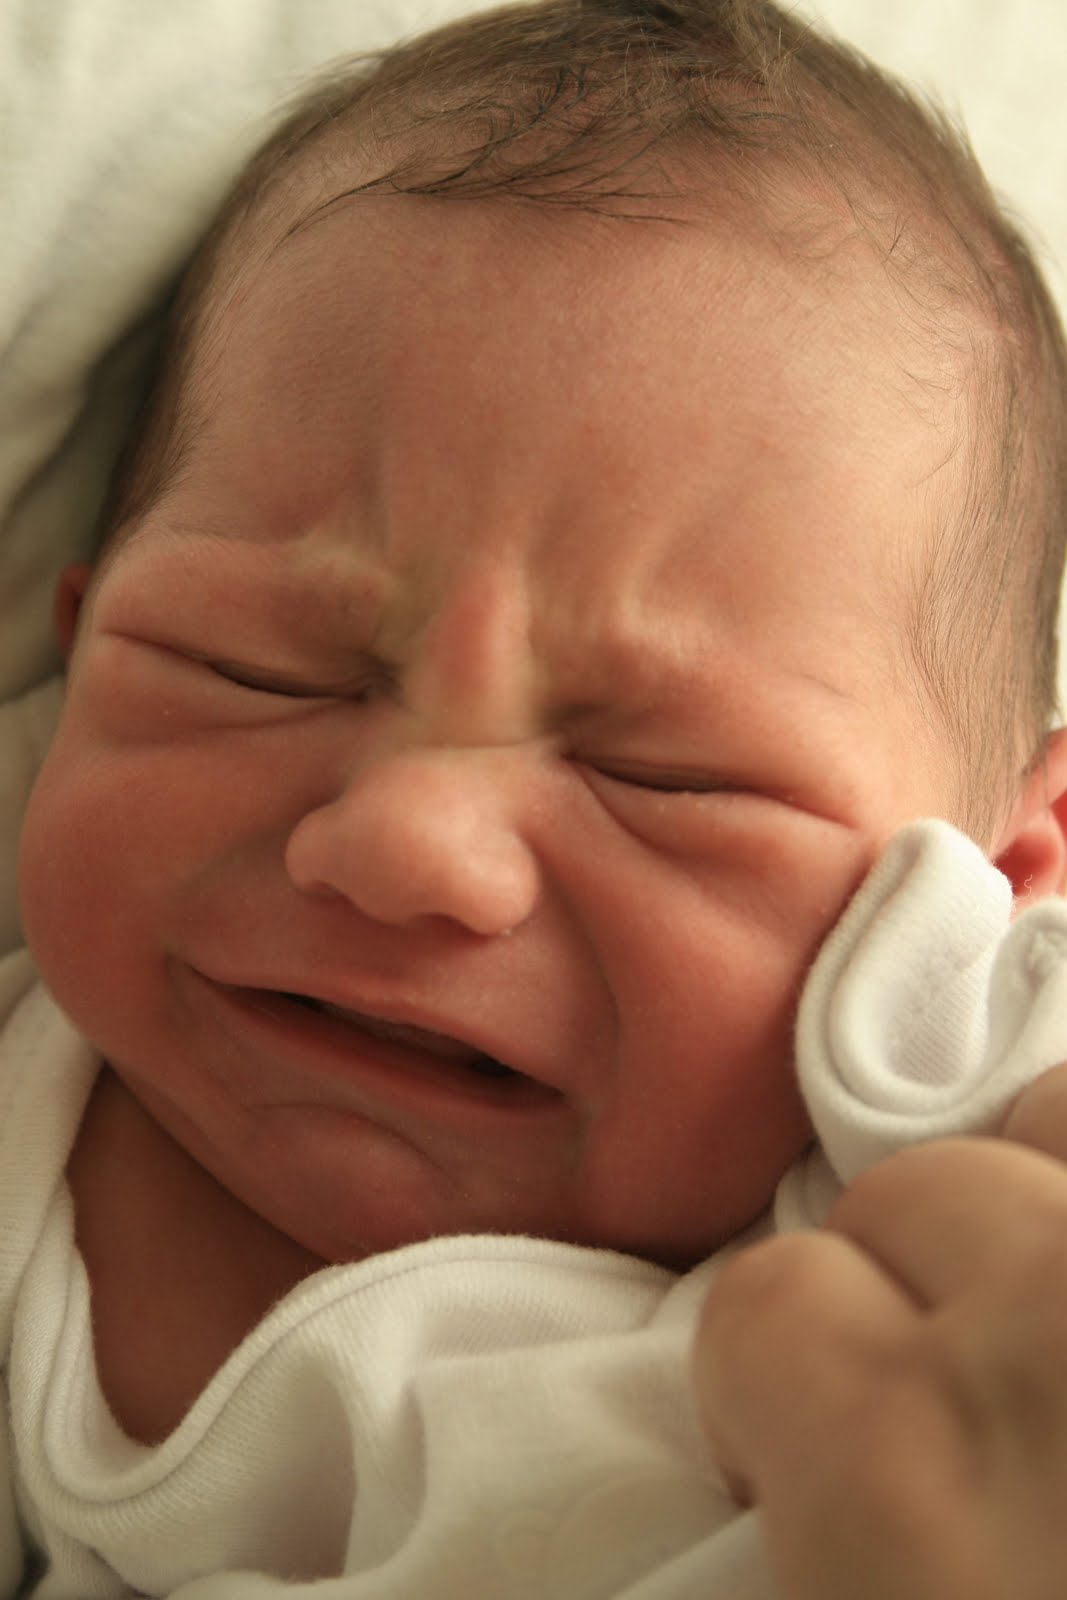 STRESS HORMONES WASH OVER THE BRAIN WHEN A BABY IS LEFT ALONE TO CRY | Early Childhood ...